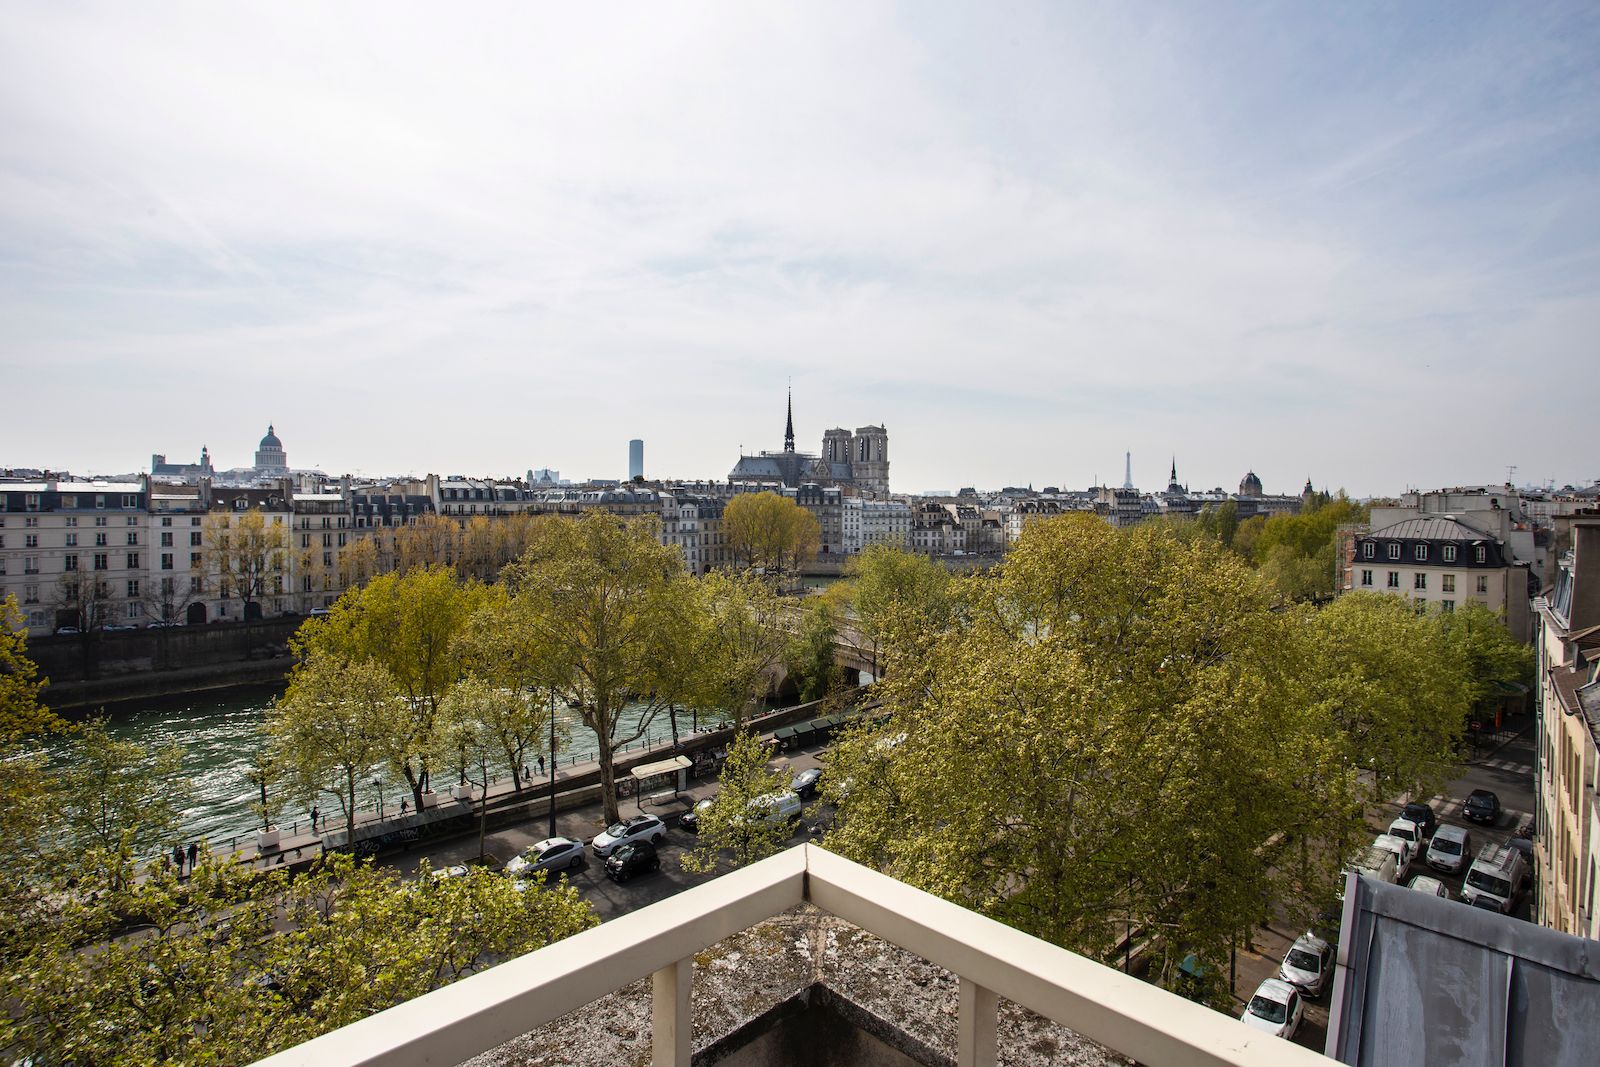 A view of Paris from a balcony showing the River Seine and in the distance the Notre Dame cathedral.